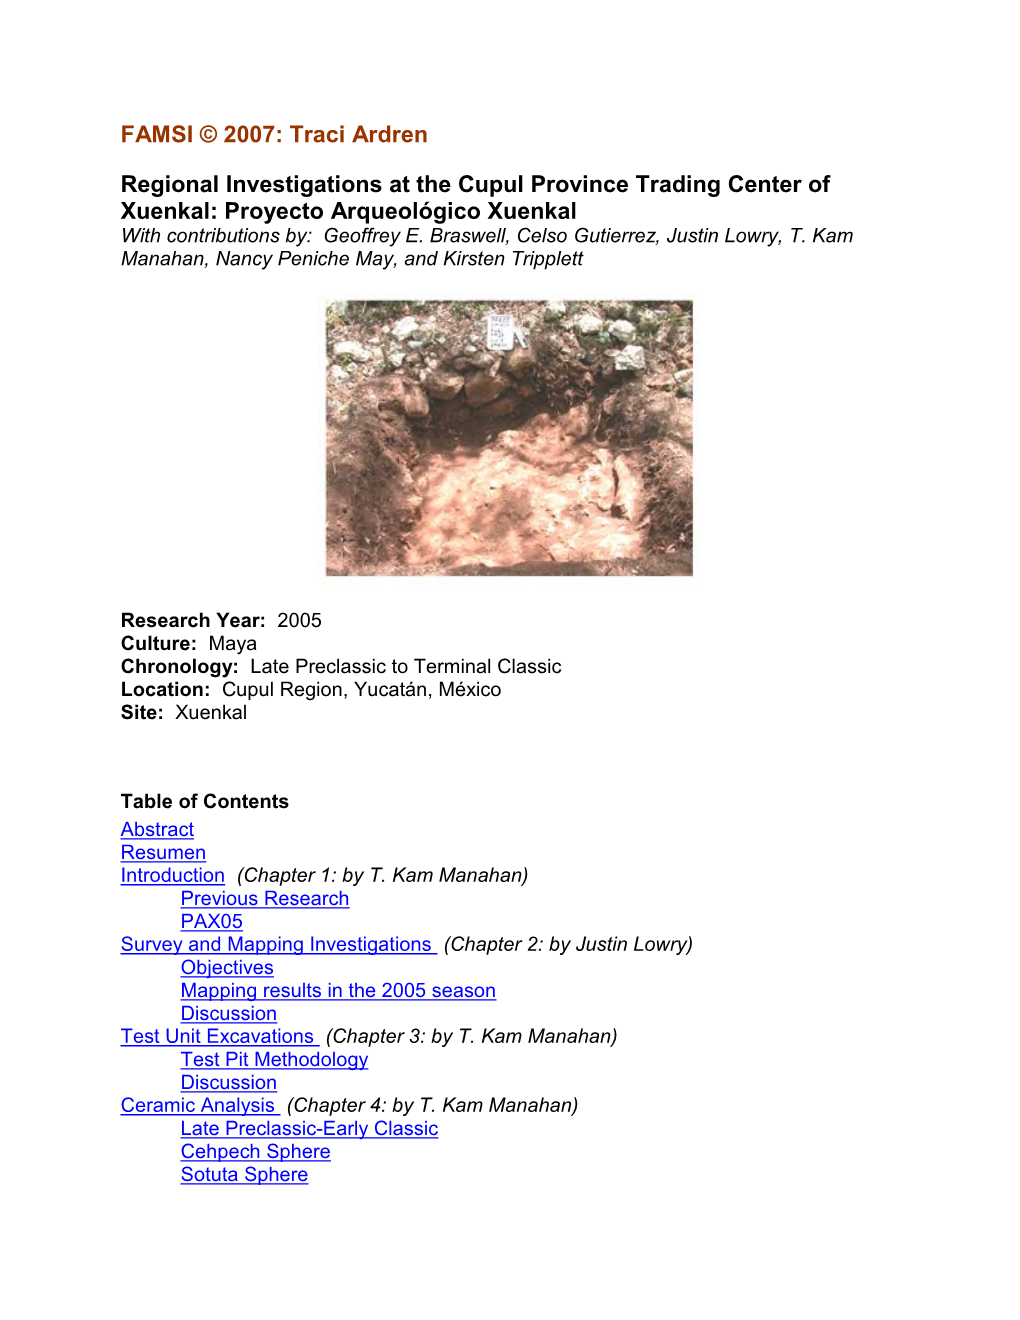 Regional Investigations at the Cupul Province Trading Center of Xuenkal: Proyecto Arqueológico Xuenkal with Contributions By: Geoffrey E